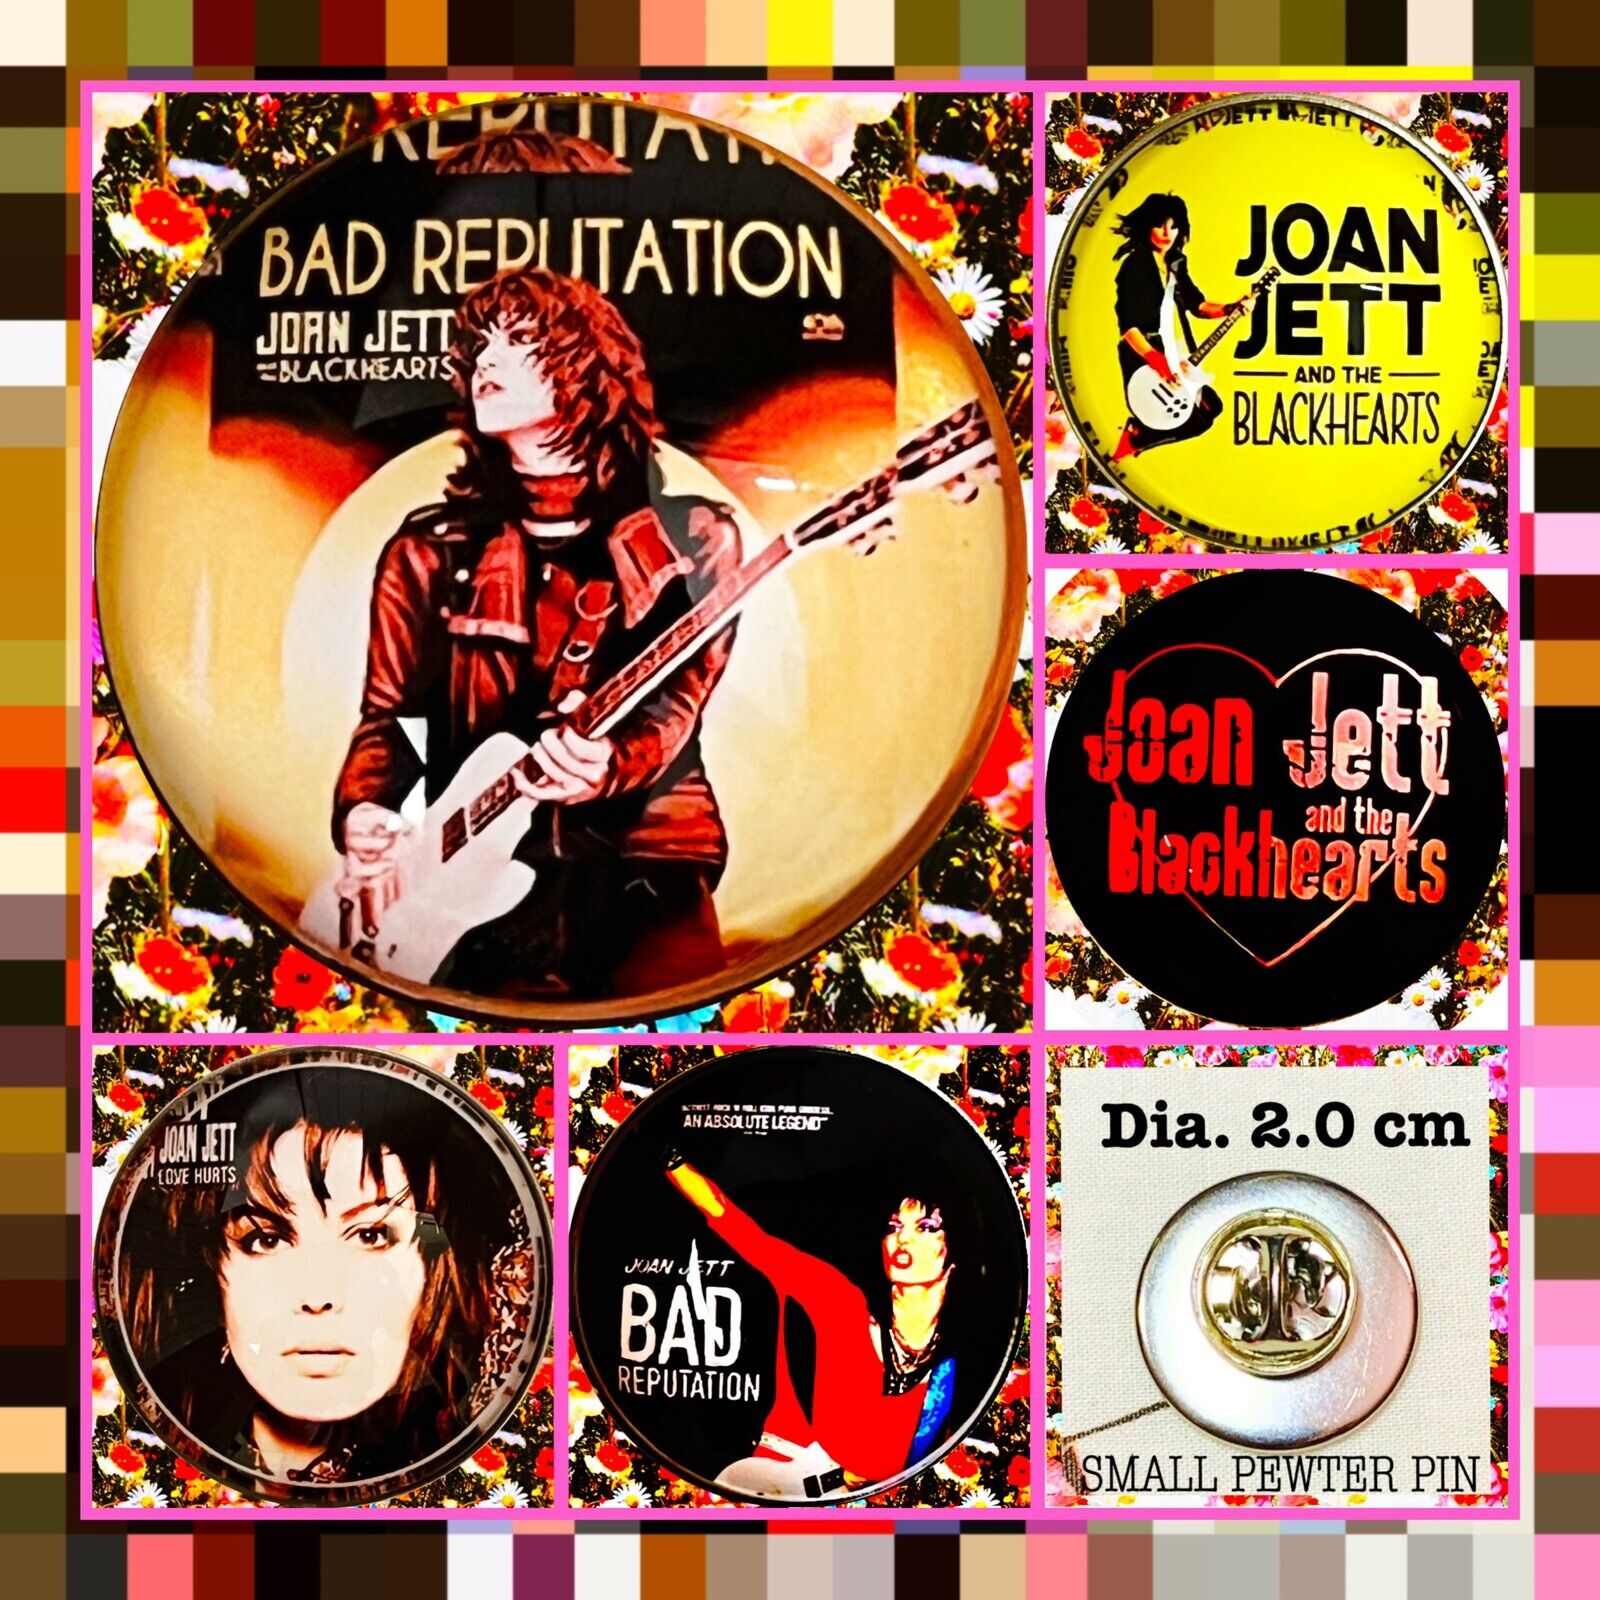 JOAN JETT BAD REPUTATION SMALL PEWTER PINS LOT OF FIVE 🇺🇸 GIFT & CONCERT ACC.